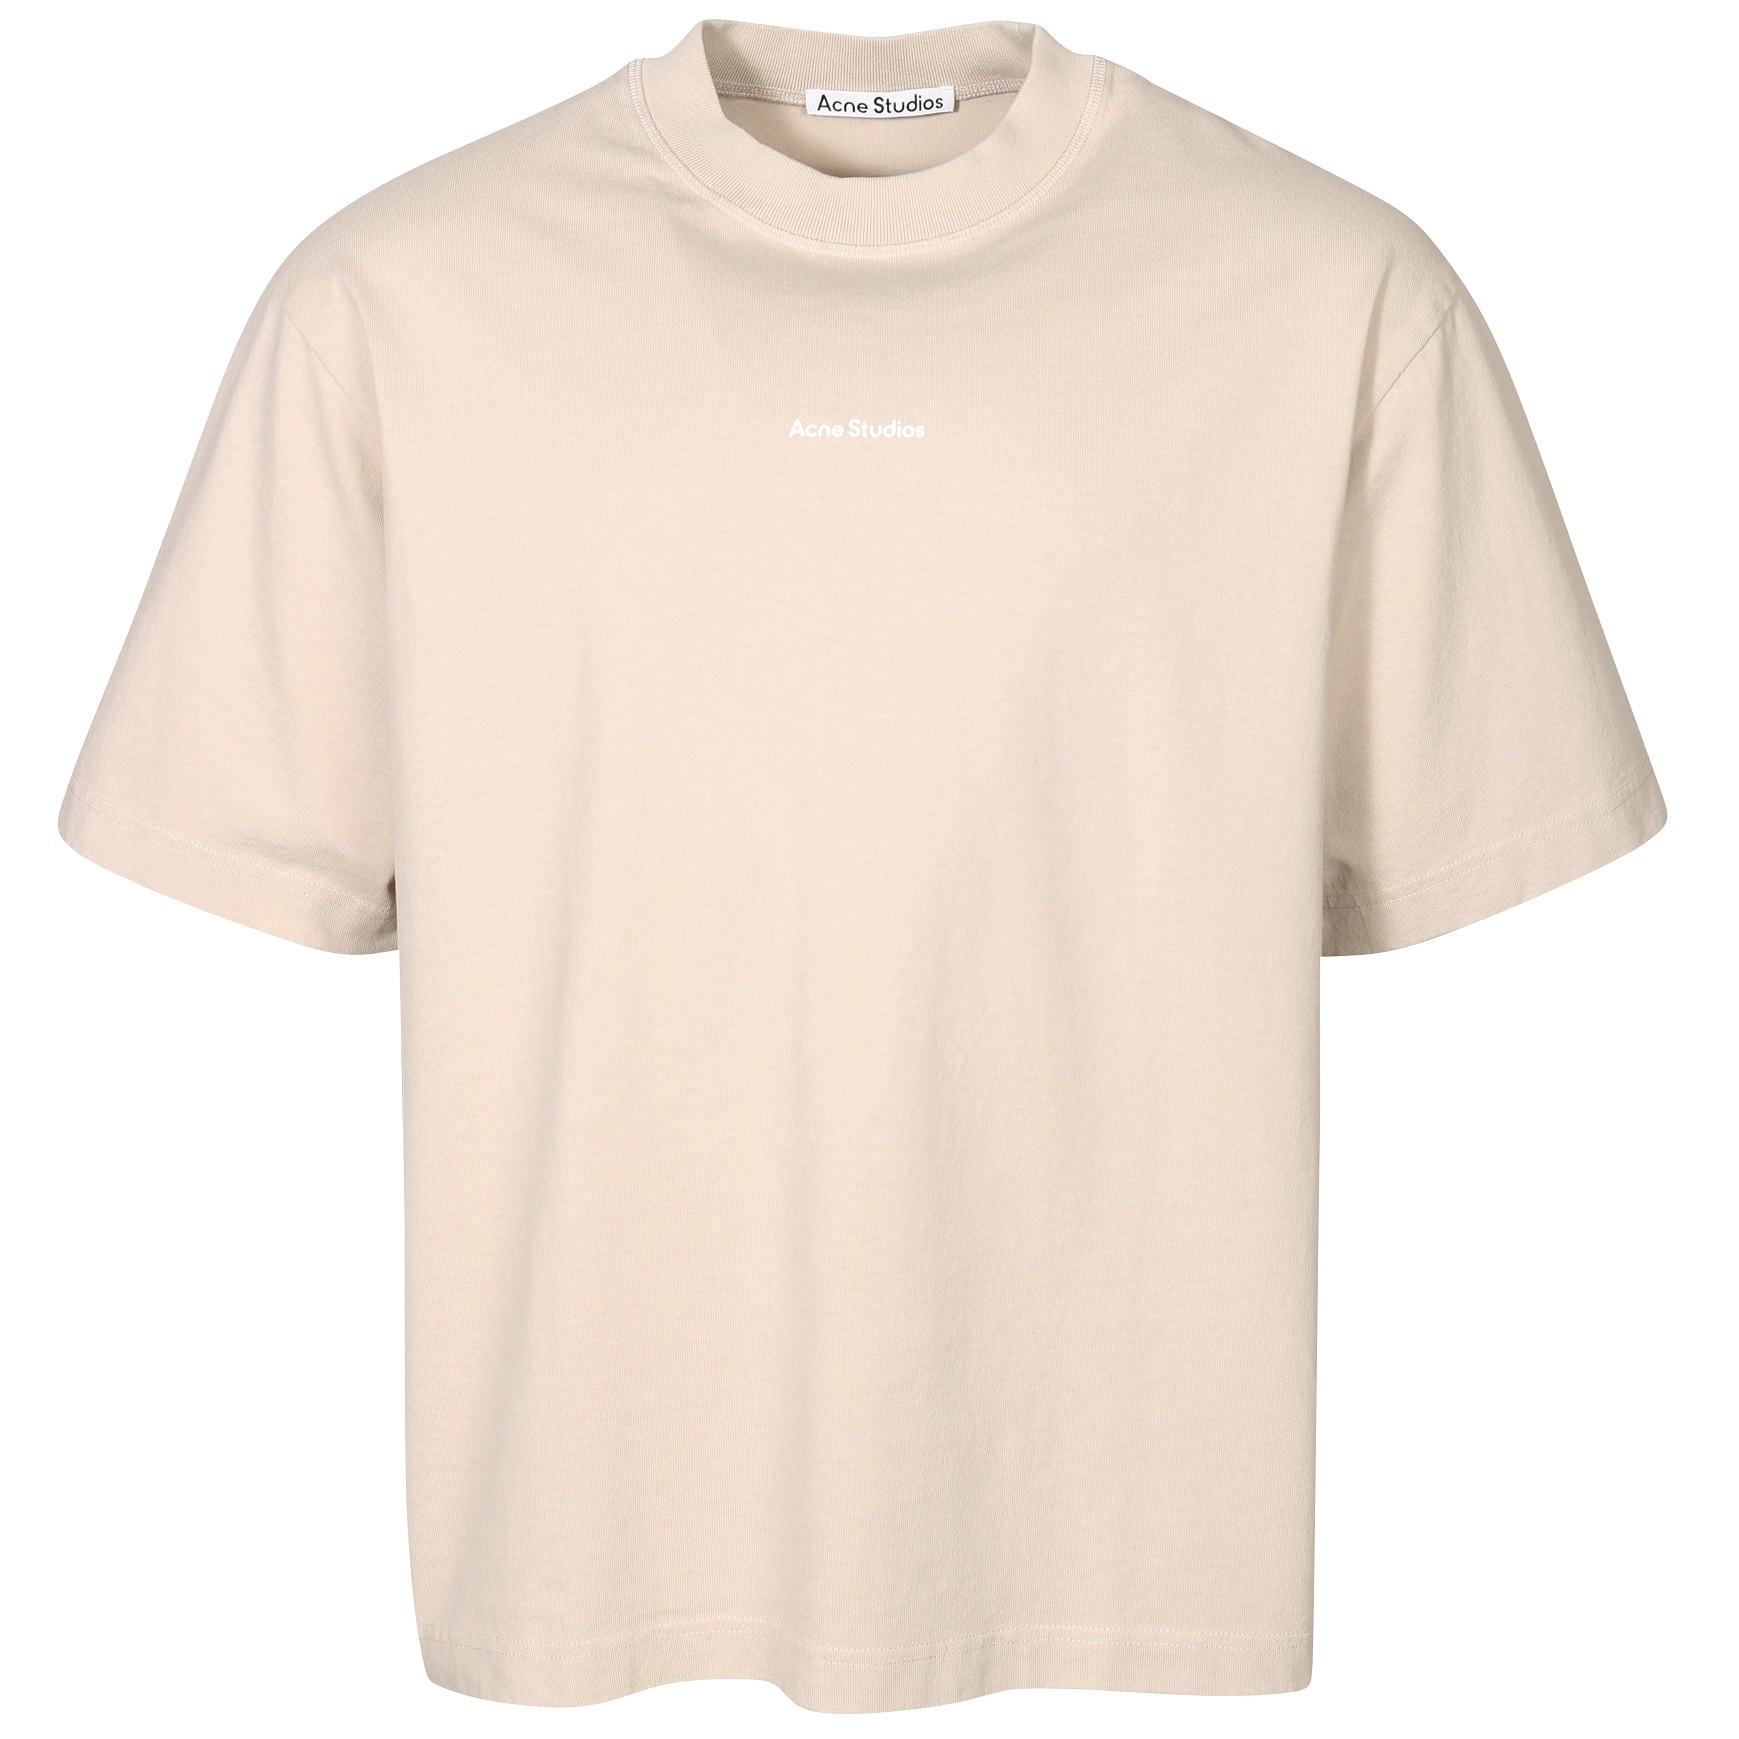 ACNE STUDIOS Loose Fit Stamp T-Shirt in Champagne Beige